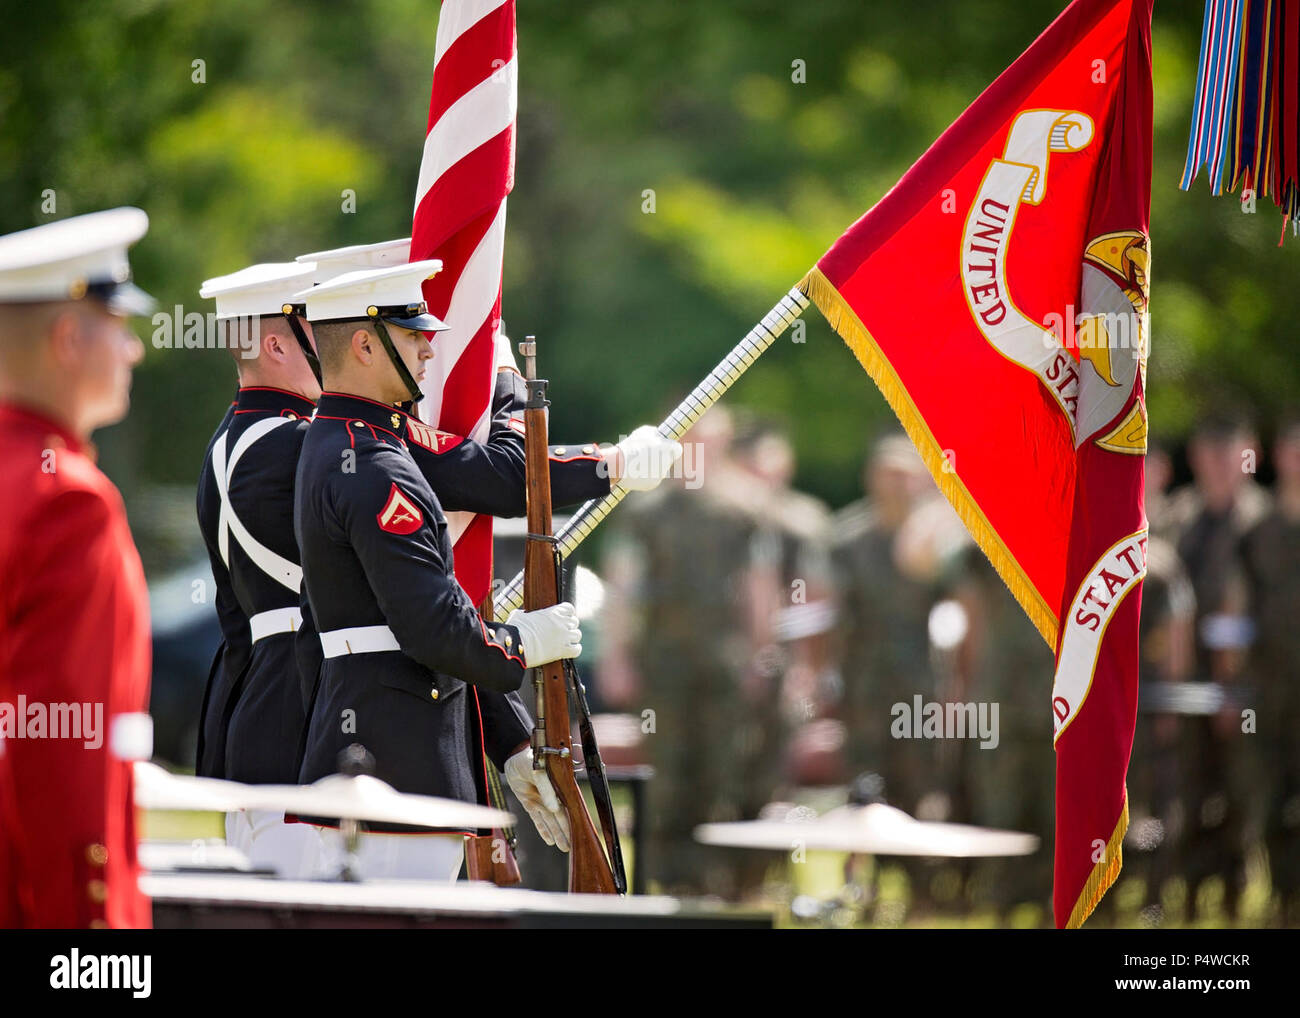 The U.S. Marine Corps Quantico Color Guard presents the colors during the Centennial Celebration Ceremony at Lejeune Field, Marine Corps Base (MCB) Quantico, Va., May 10, 2017. The event commemorates the founding of MCB Quantico in 1917, and consisted of performances by the U.S. Marine Corps Silent Drill Platoon and the U.S. Marine Drum & Bugle Corps. Stock Photo